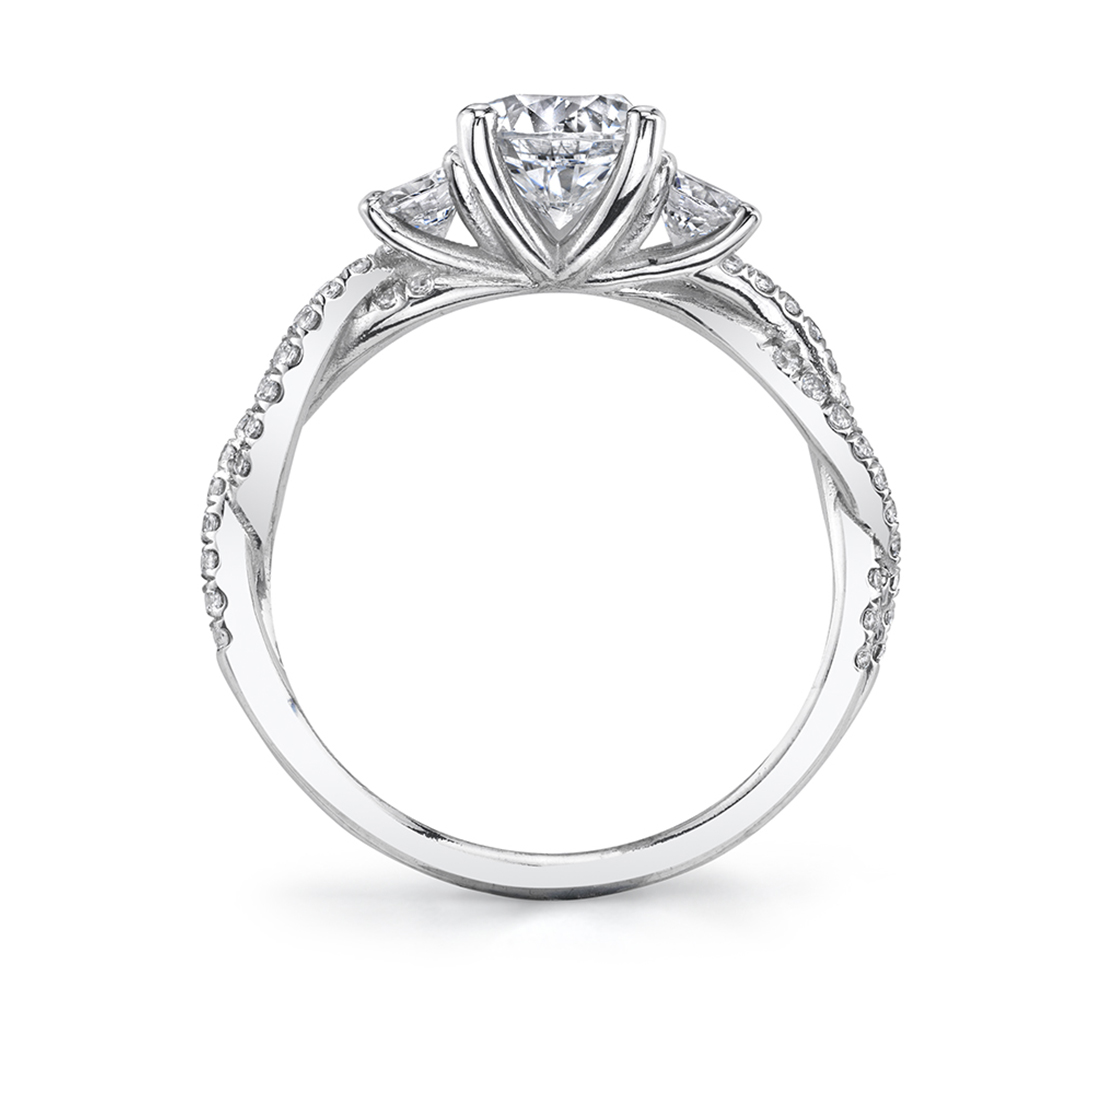 Profile of 3 Stone Engagement Ring in White Gold - Gina